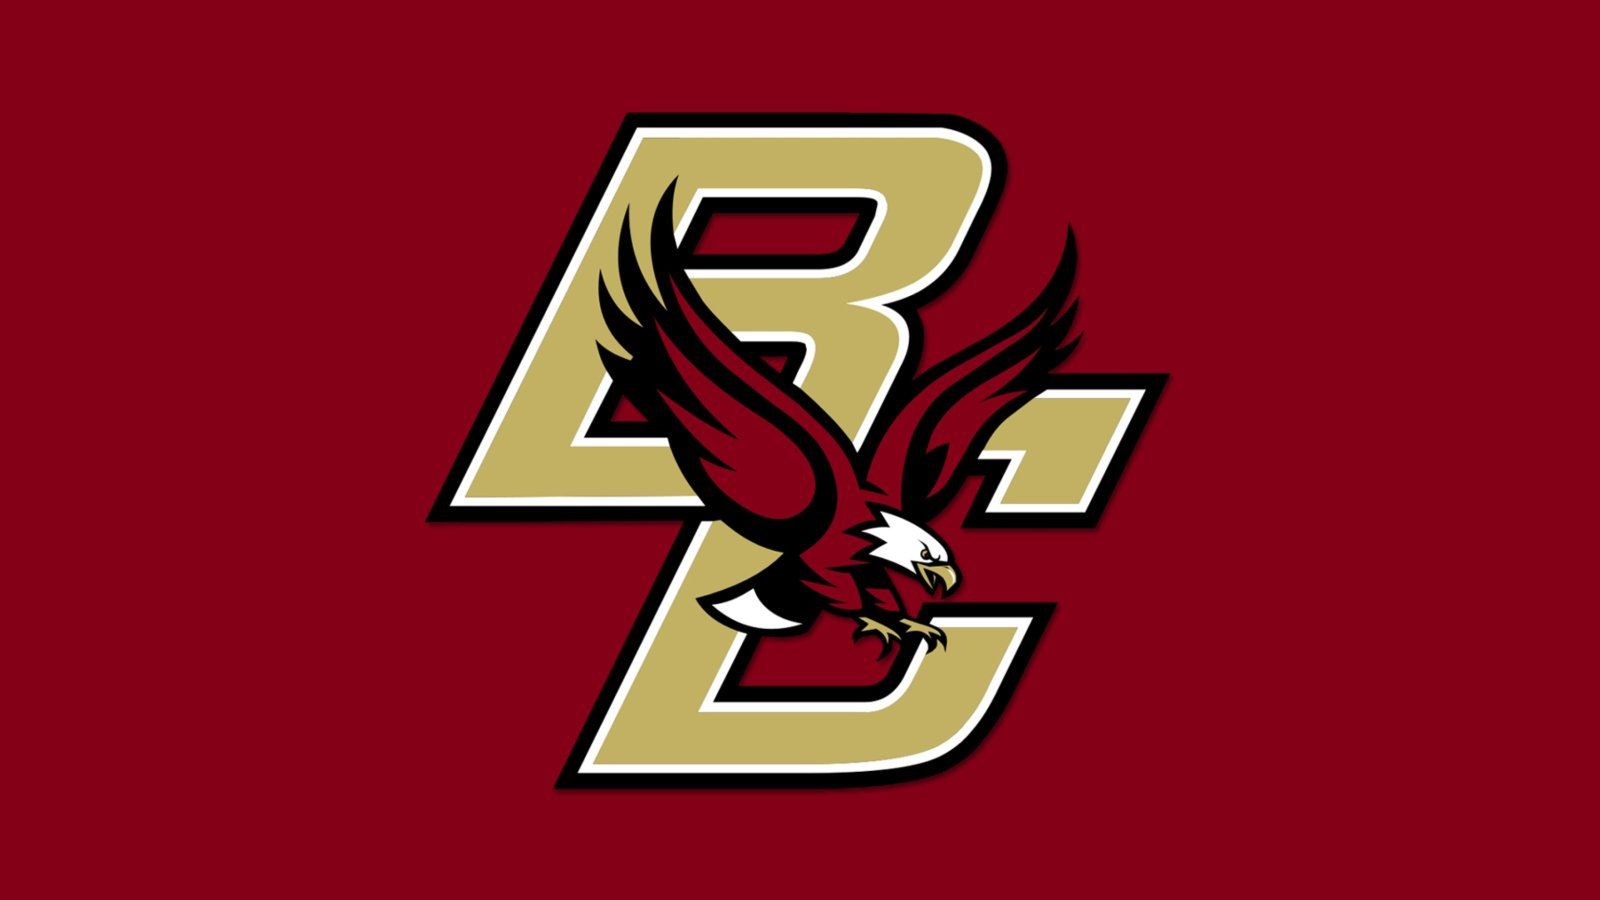 Boston college wallpapers